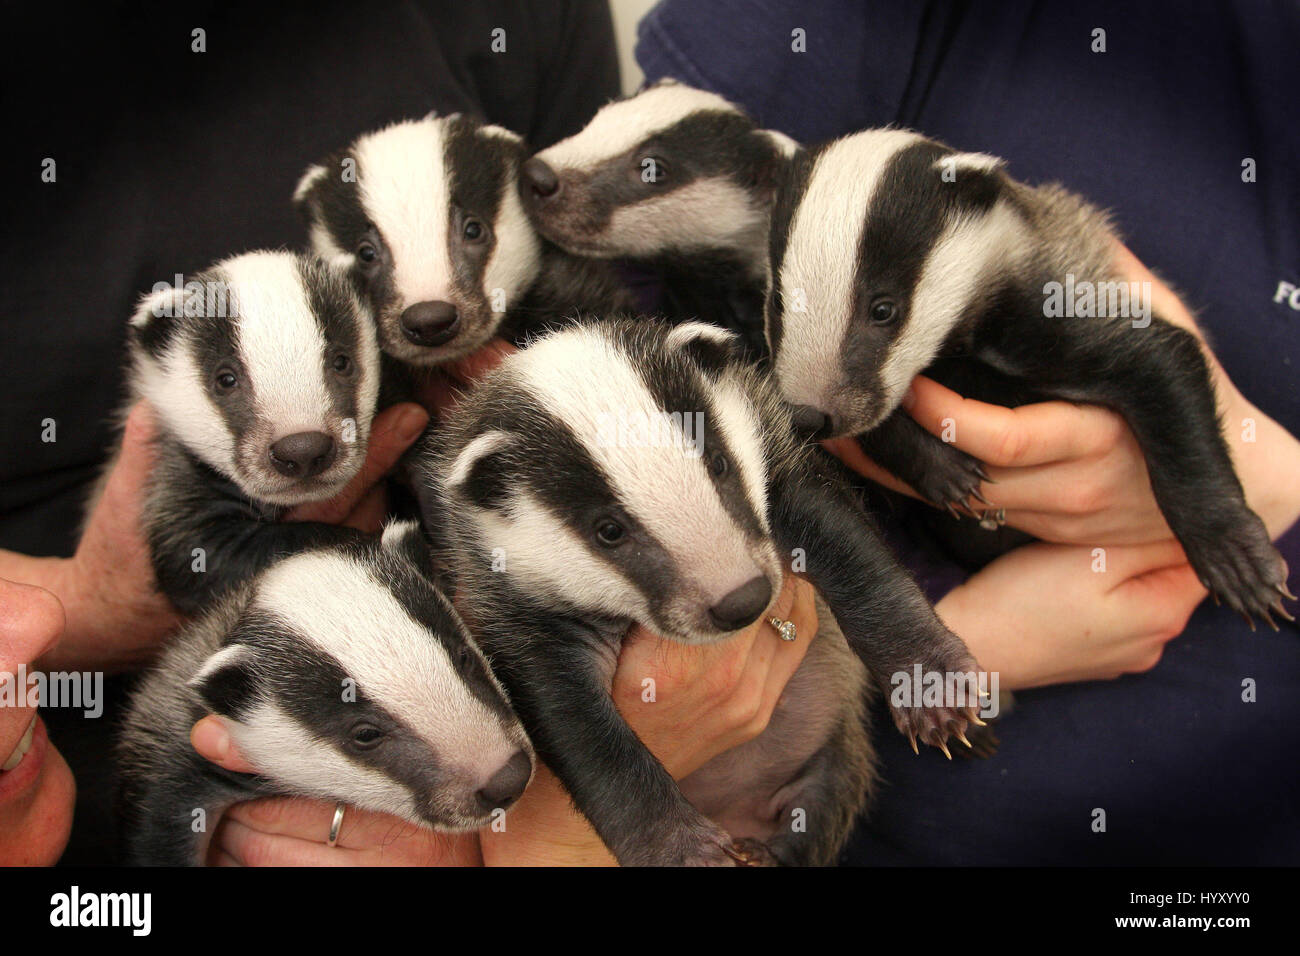 Badger Cubs With their adorable faces, shiny eyes and striped fur, it is hard to imagine any mother abandoning them. Stock Photo